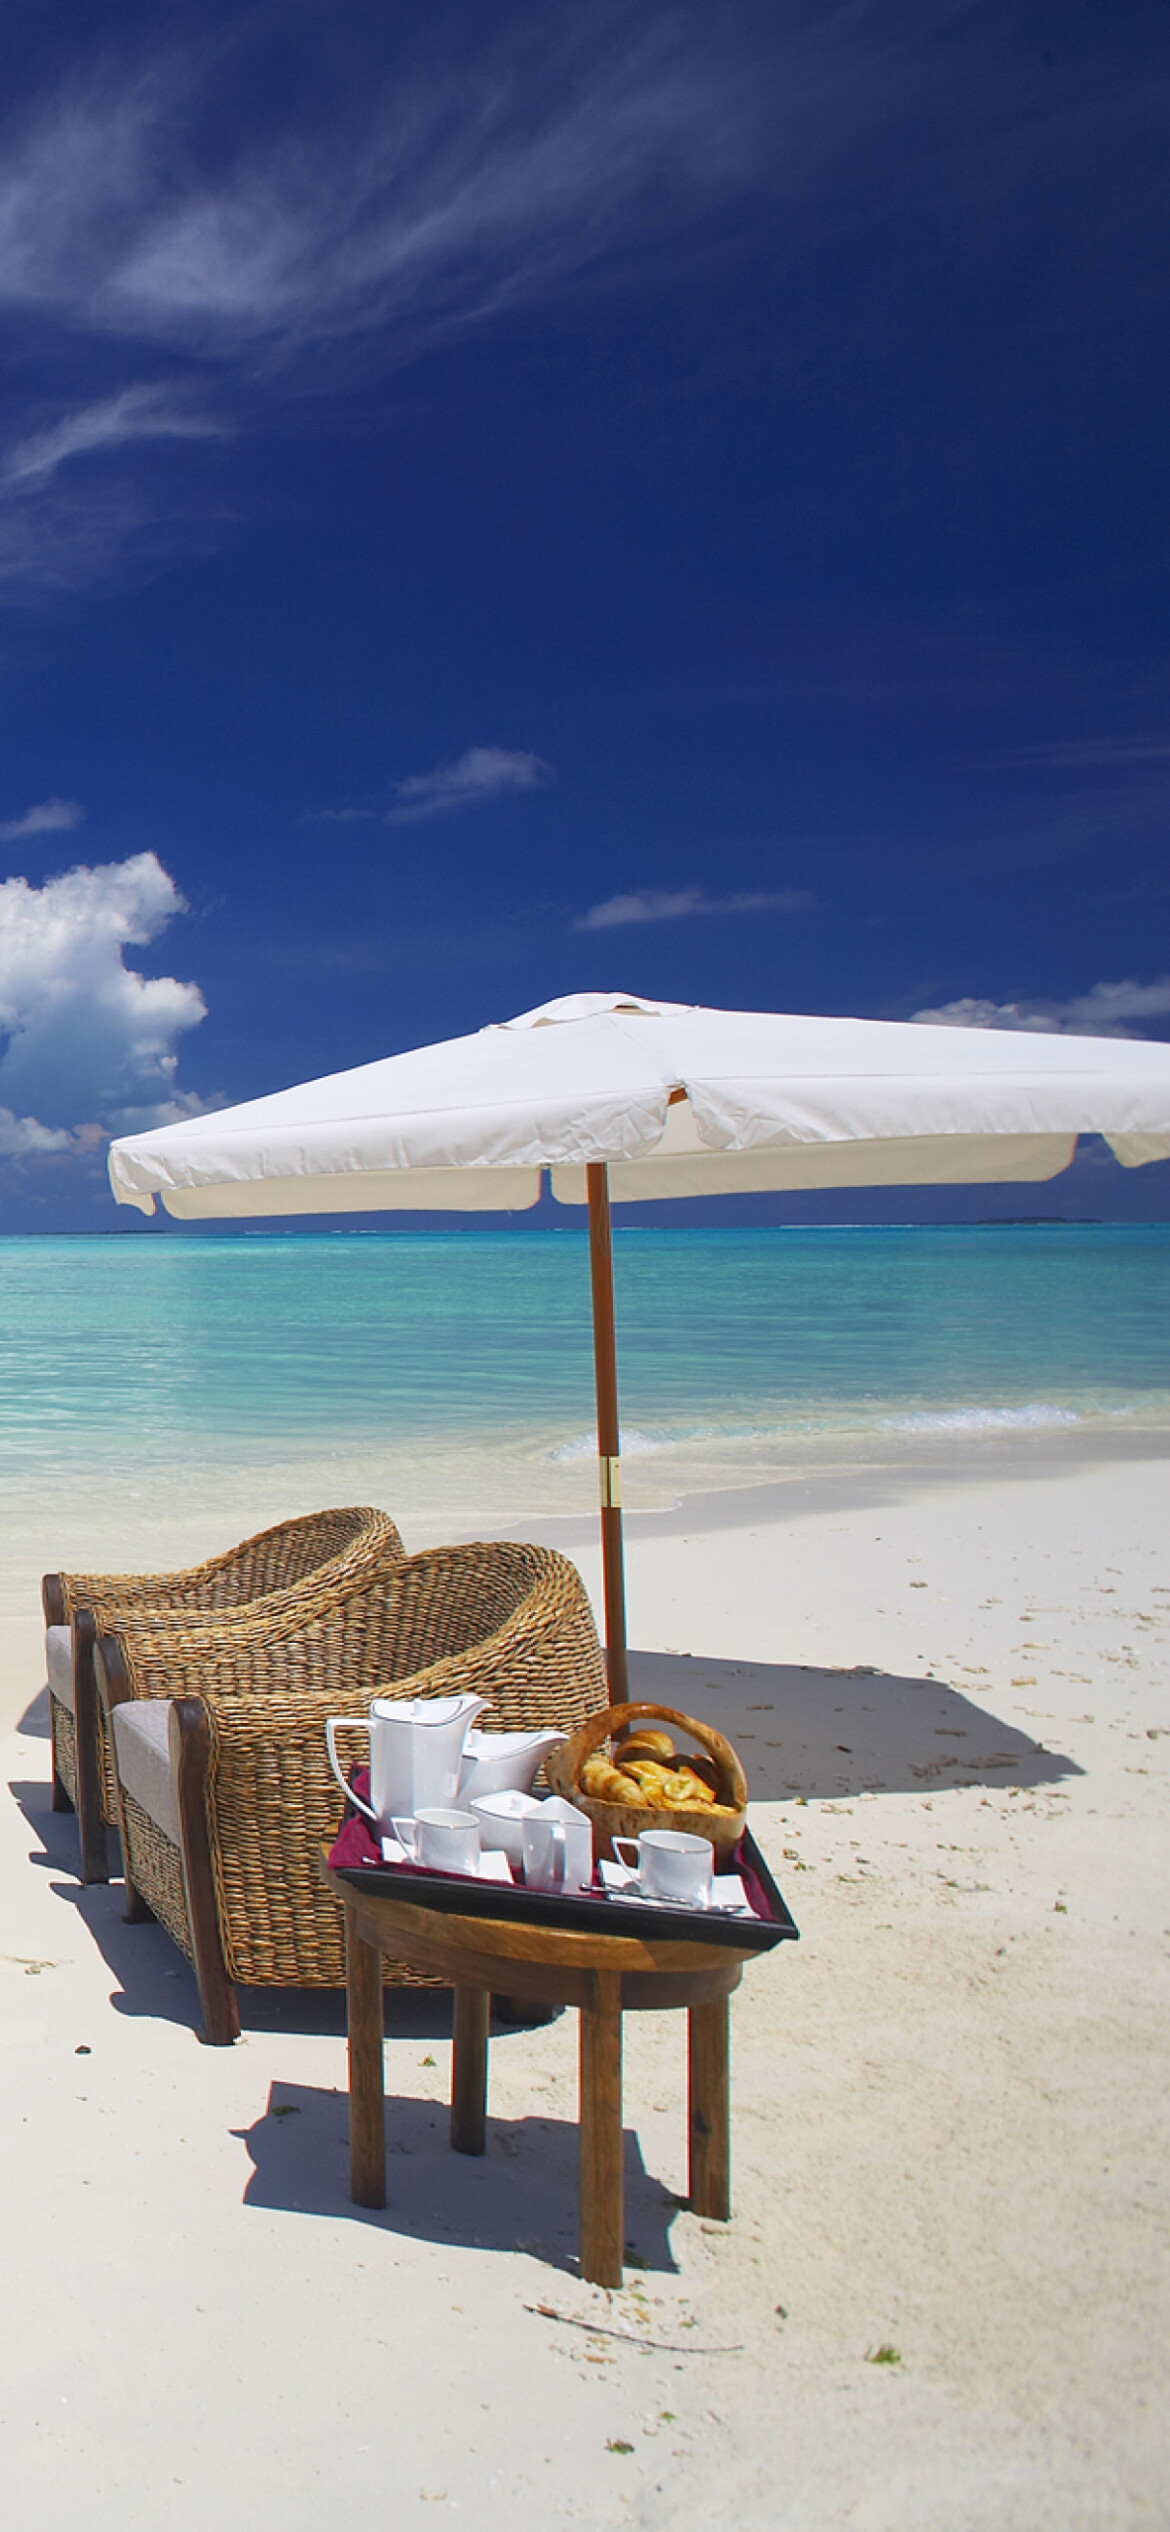 Maldives: An archipelago of 1,192 coral islands, Luxury all-inclusive resort. 1170x2540 HD Background.